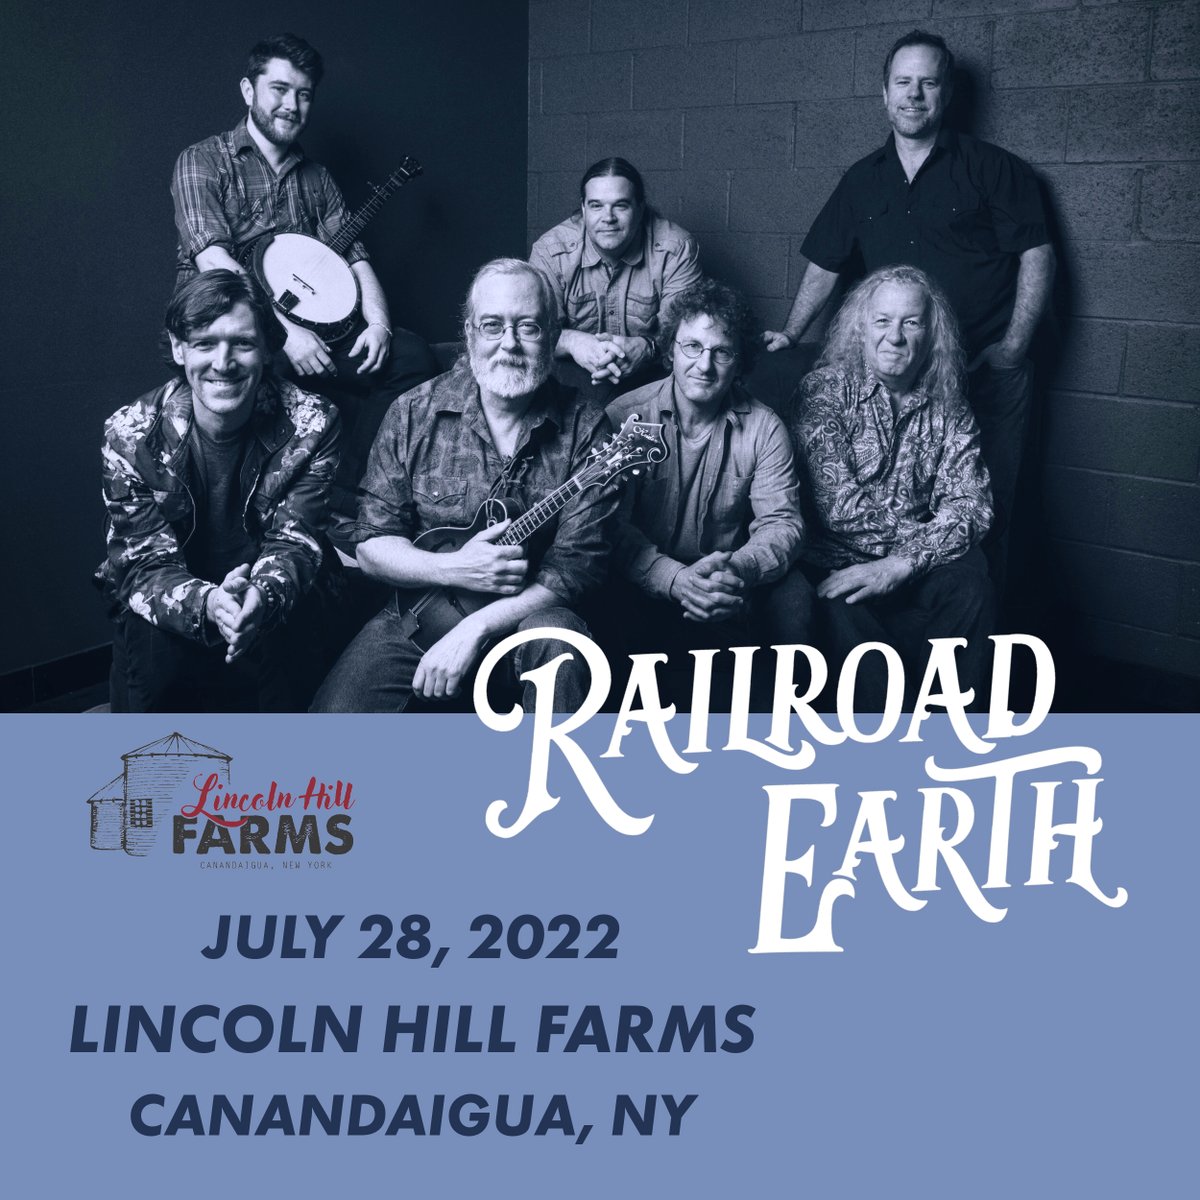 We're going to be live on the Hops Yard Stage at Lincoln Hill Farms in Canandaigua, NY on Thursday, July 28th! Tickets on sale NOW: tickets.lincolnhillfarms.com/events/0180bd8…